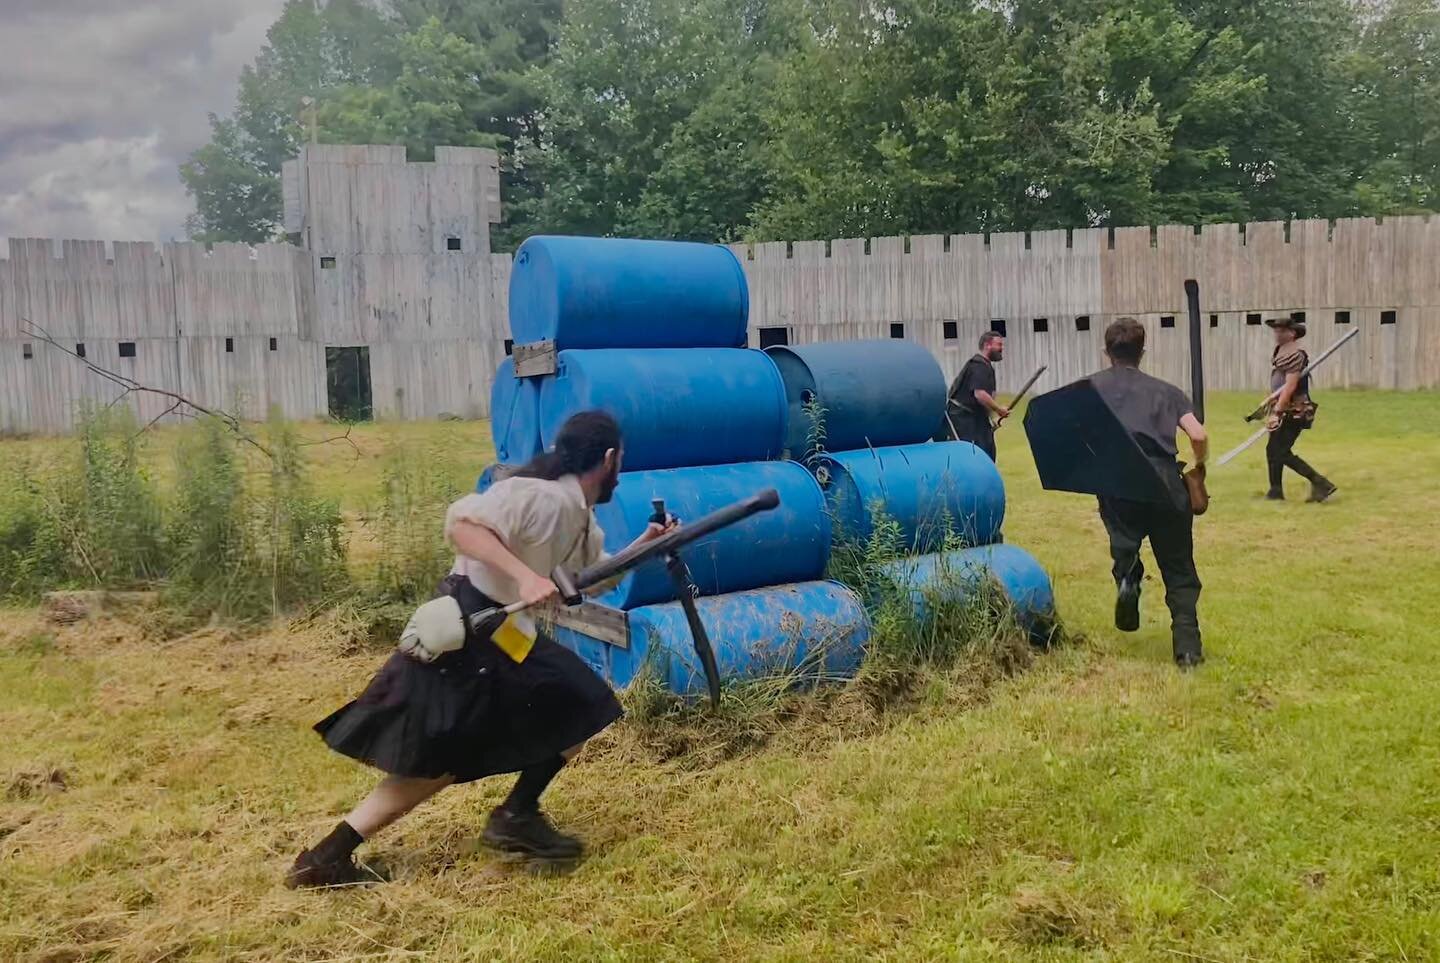 Through scorching sun, cold rain, death, mysteries, and many birthdays, we all got to experience another gather in the lands of Kenaikan. Hope to see you at closer on Sept. 29th-Oct. 1st!

#larp #larping4life #larping #larpislife #larpcostume #larper